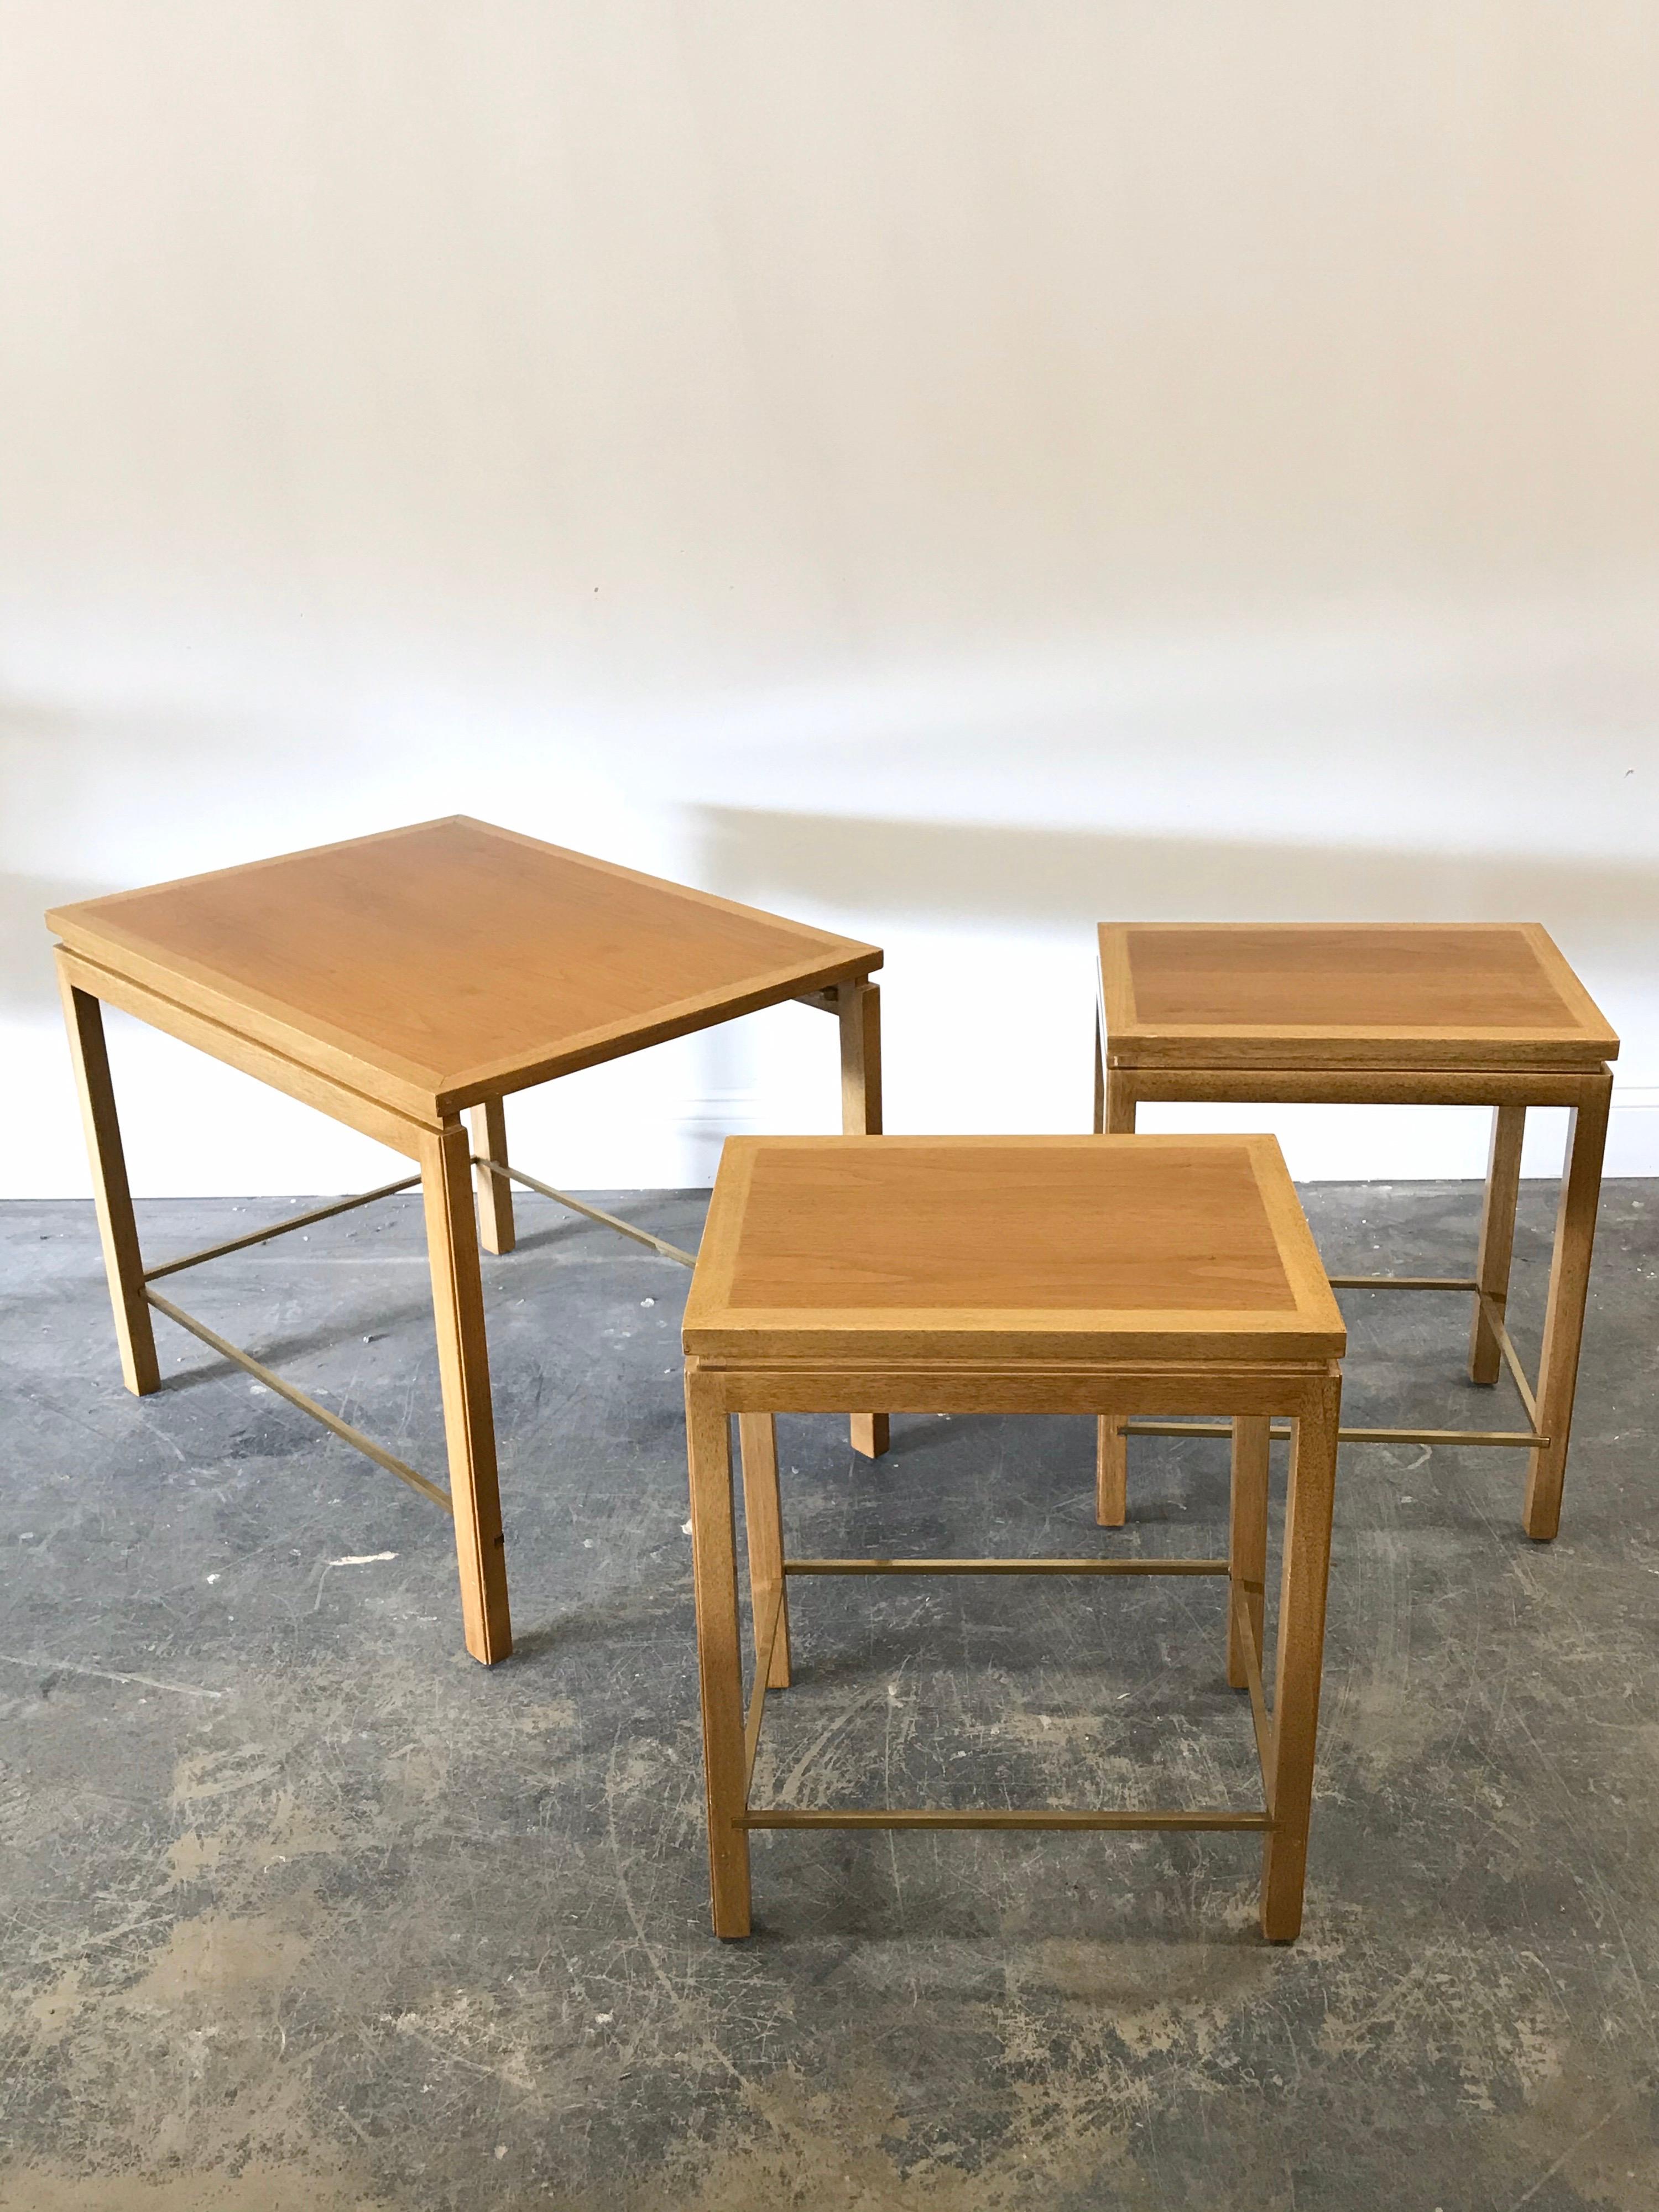 Beautiful set of three nesting tables designed by Edward Wormley for Dunbar. Tables features a mahogany structure and banding, with a soft walnut top, and finished off with brass stretchers. Please note the listed size is the larger table, the